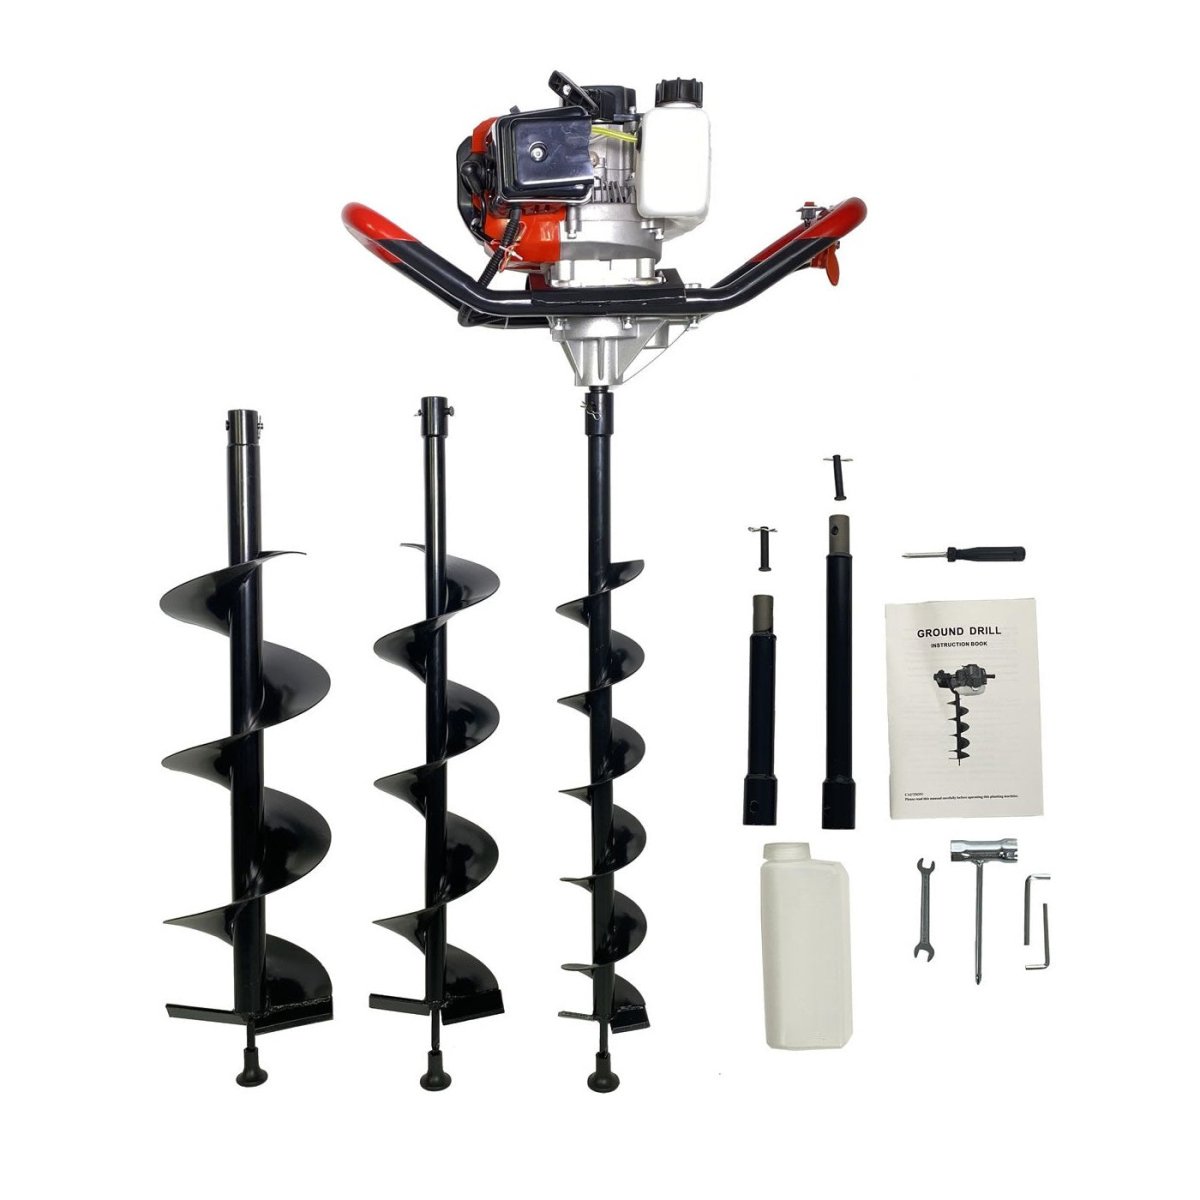 52CC PETROL EARTH AUGER FENCE POST HOLE BORER GROUND DRILL AND 2 EXTNS